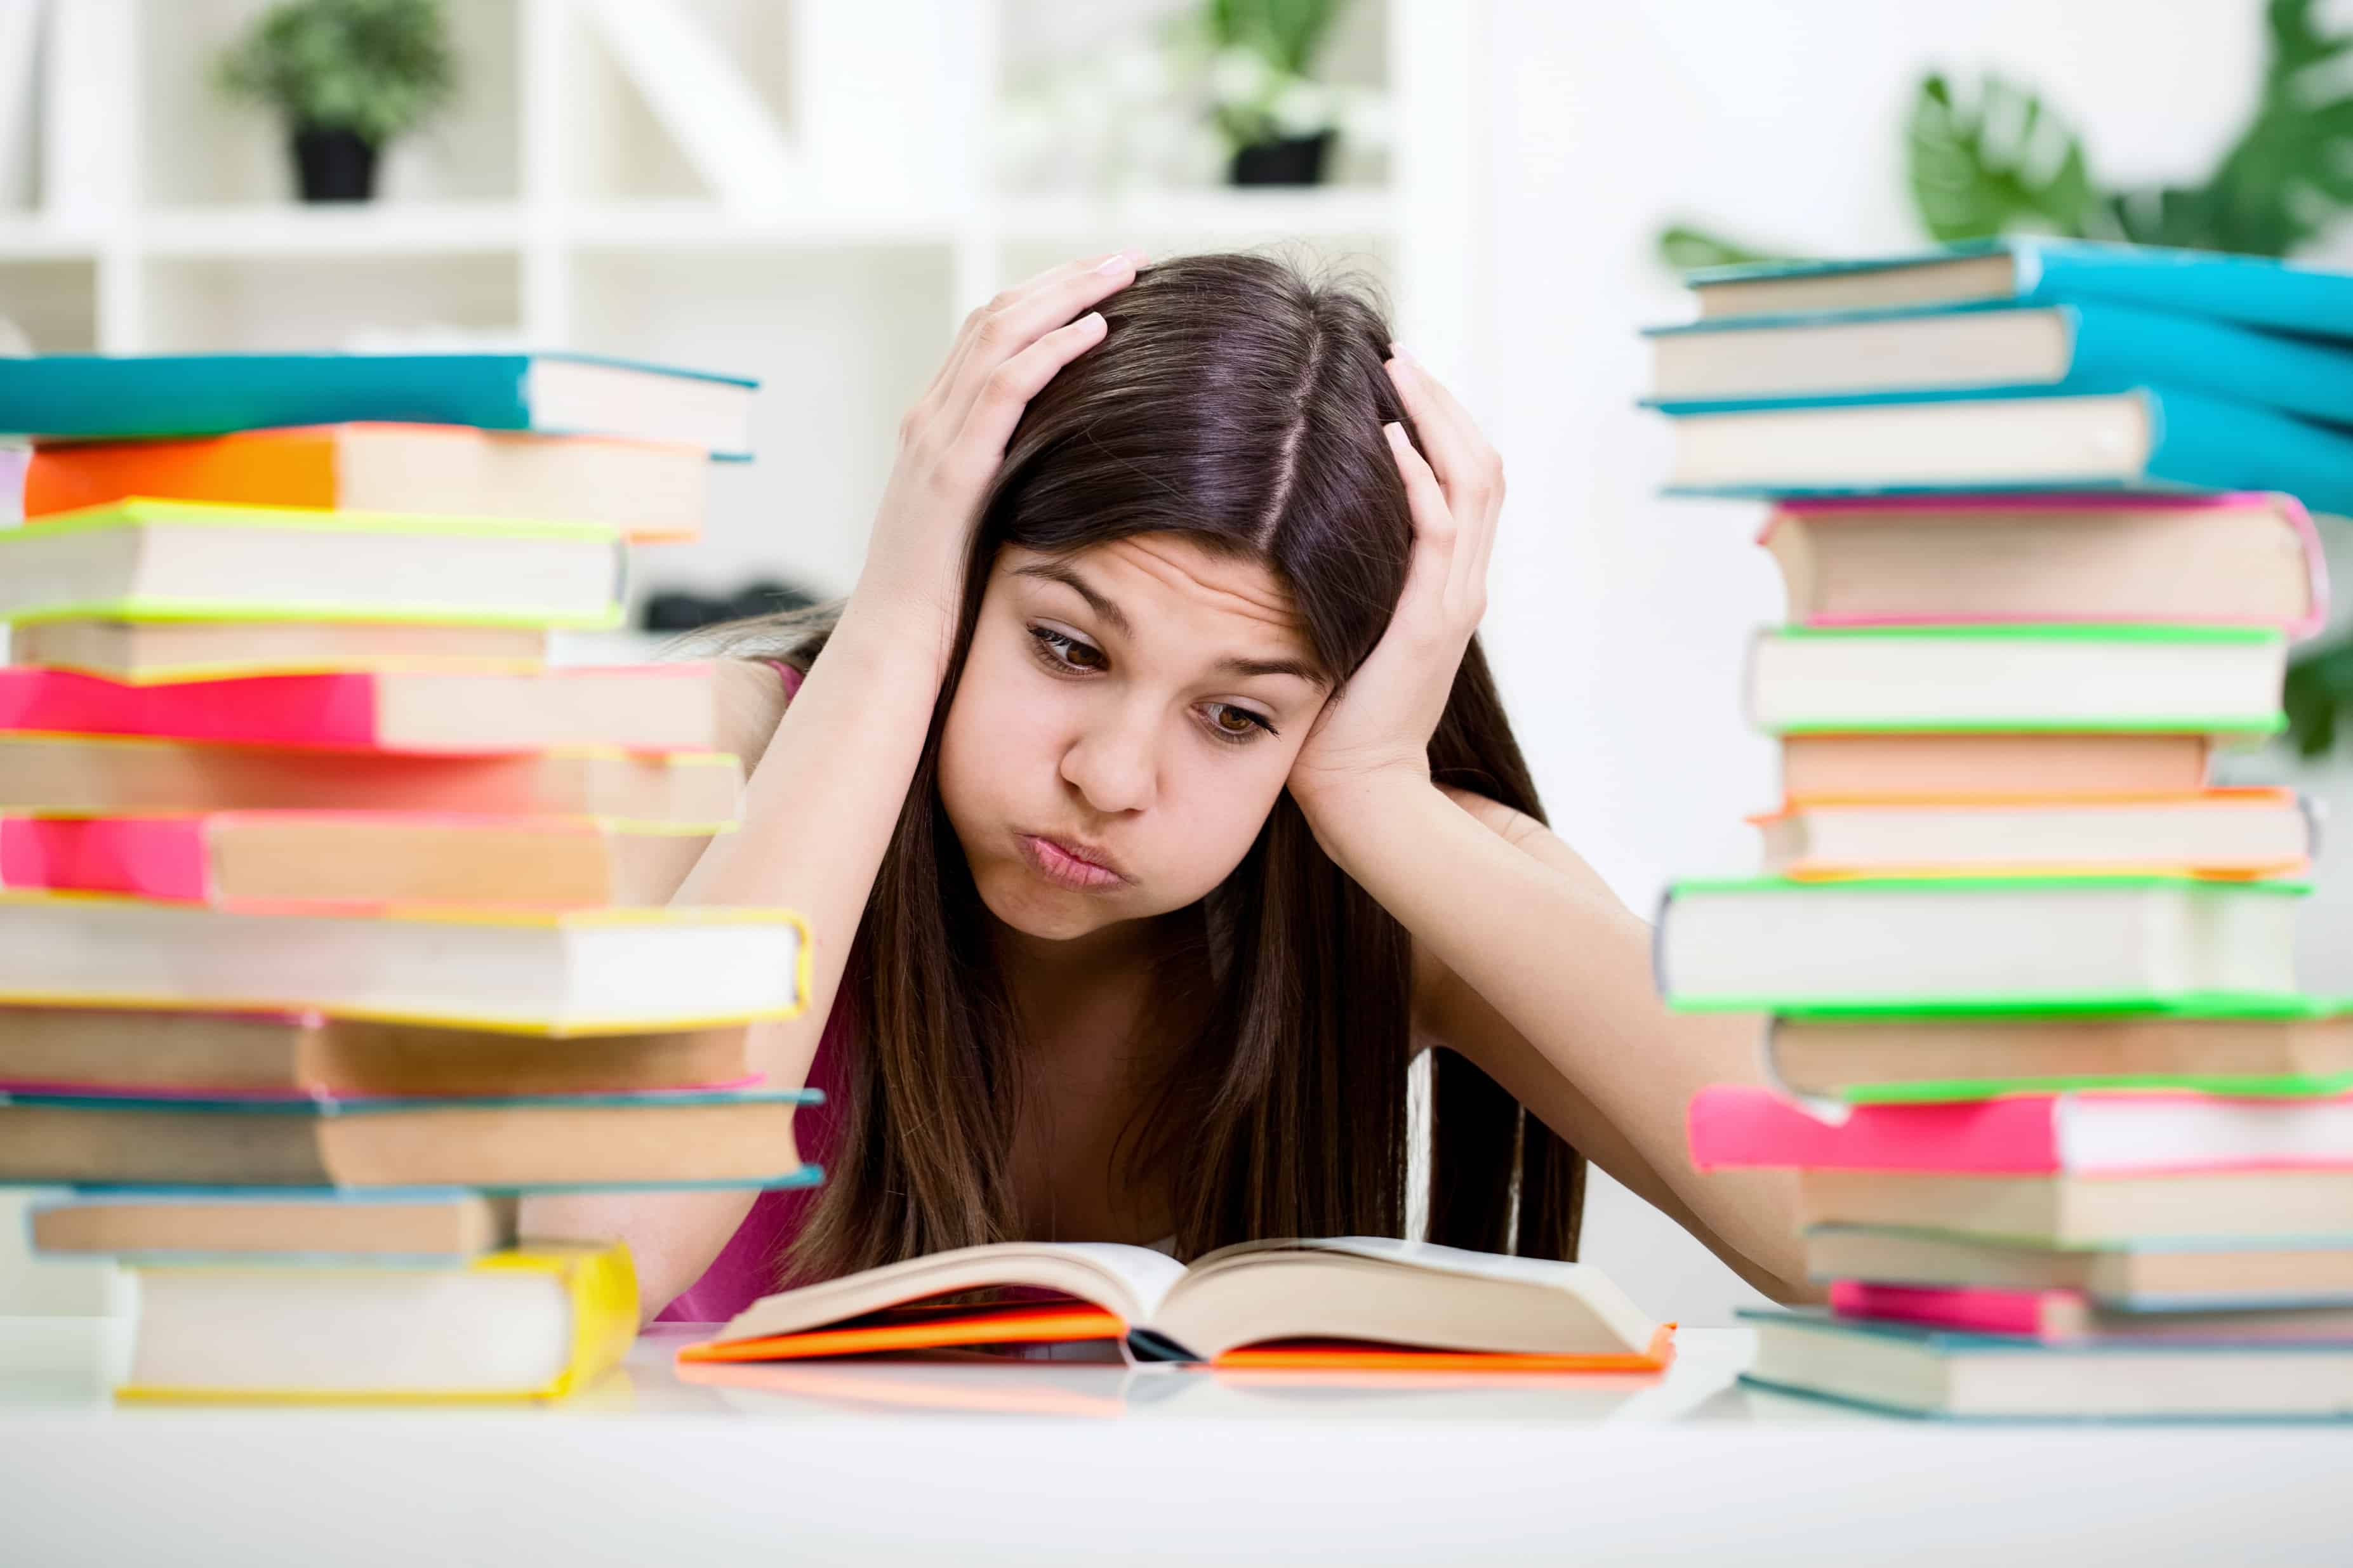 The 4 most important stress relievers for students